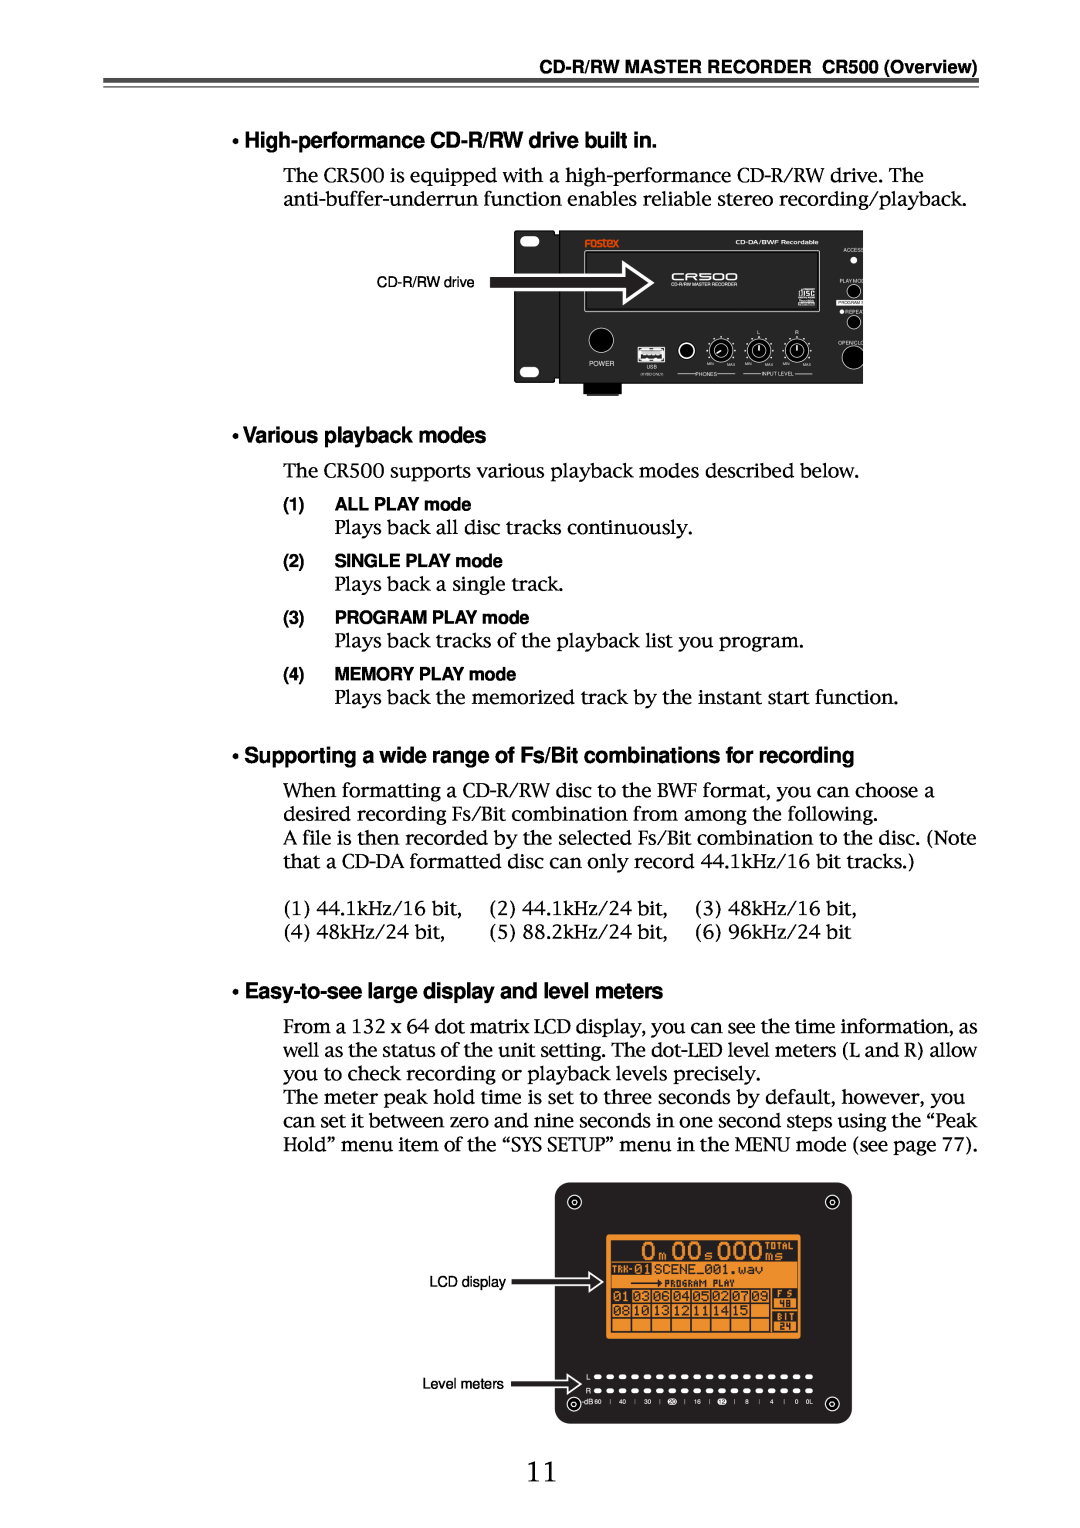 Fostex CR500 High-performance CD-R/RWdrive built in, • Various playback modes, Easy-to-seelarge display and level meters 